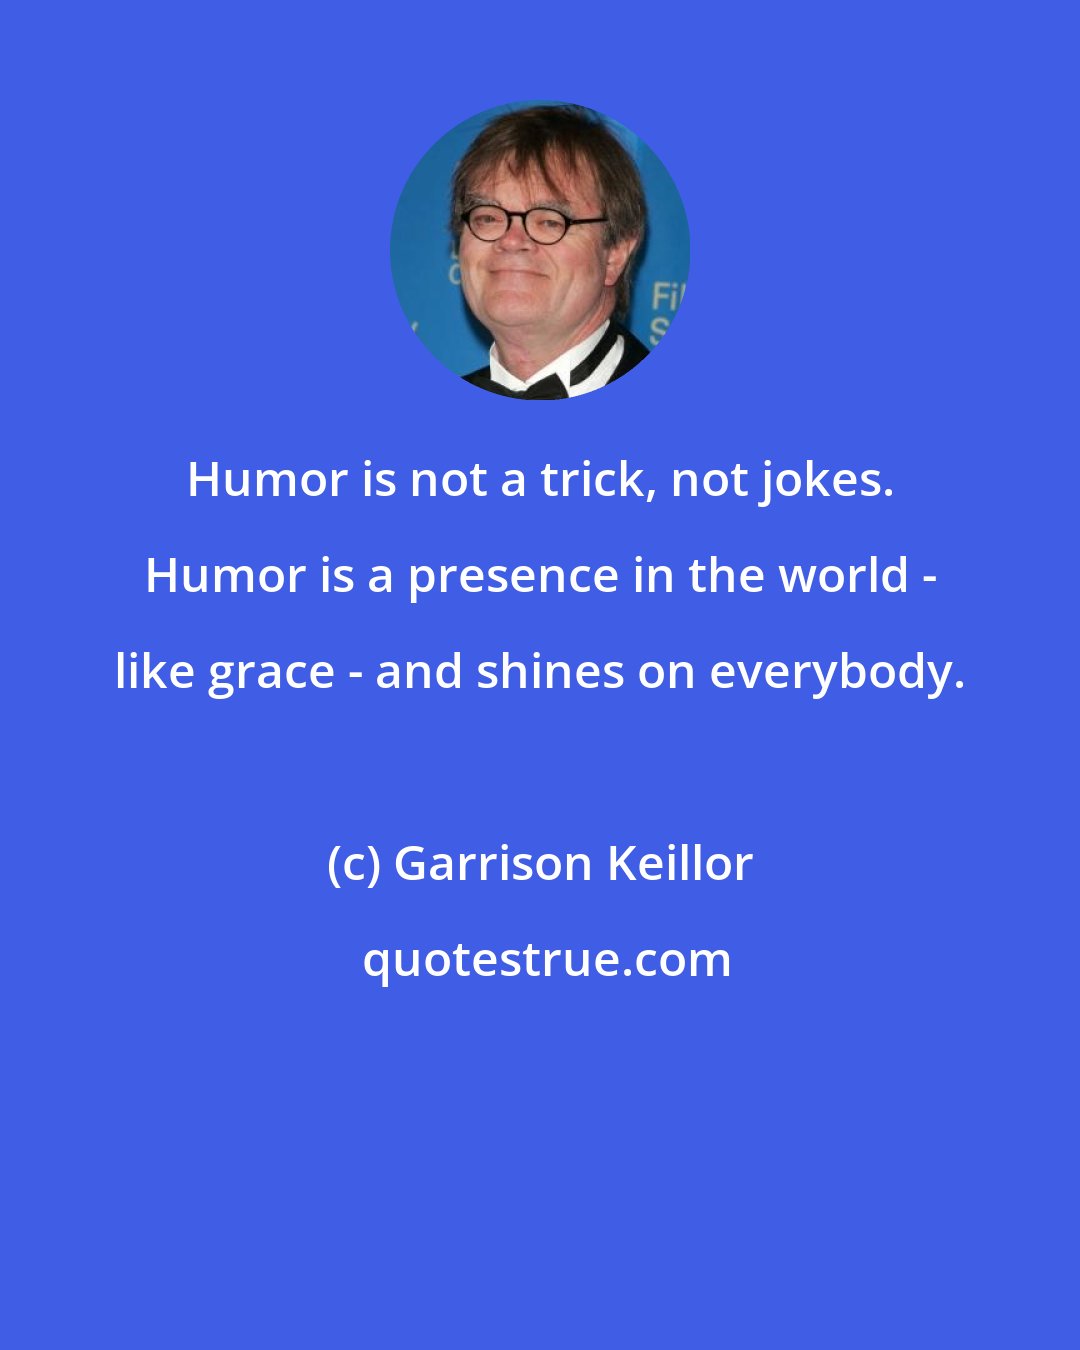 Garrison Keillor: Humor is not a trick, not jokes. Humor is a presence in the world - like grace - and shines on everybody.